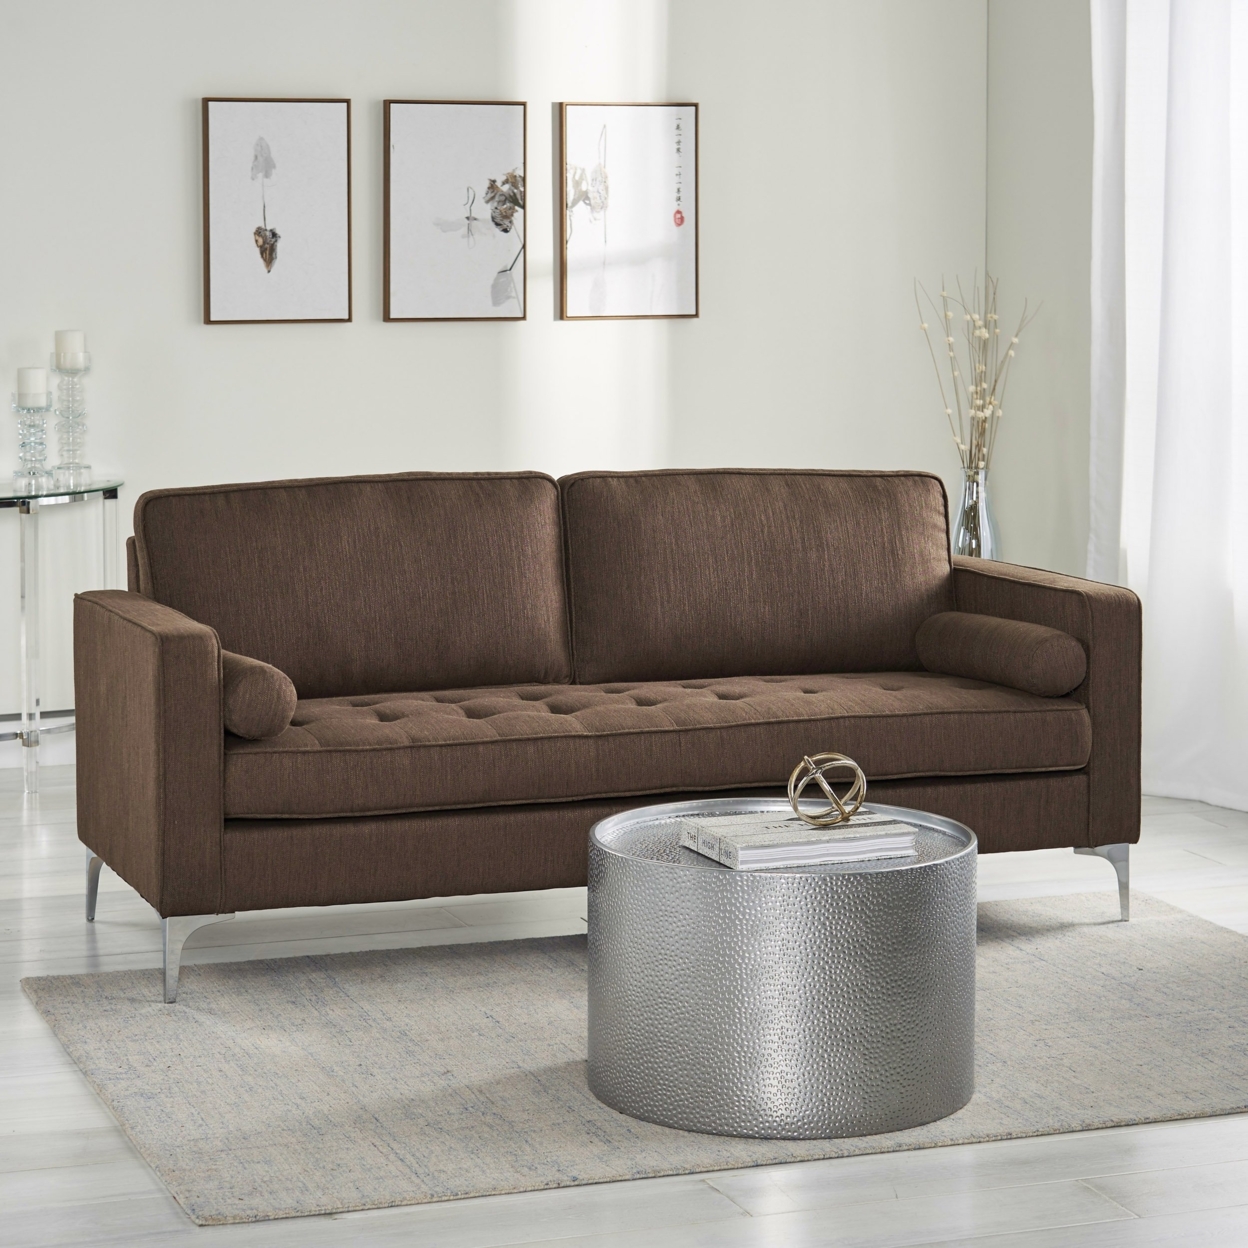 Divith Contemporary Tufted Fabric 3 Seater Sofa - Brown